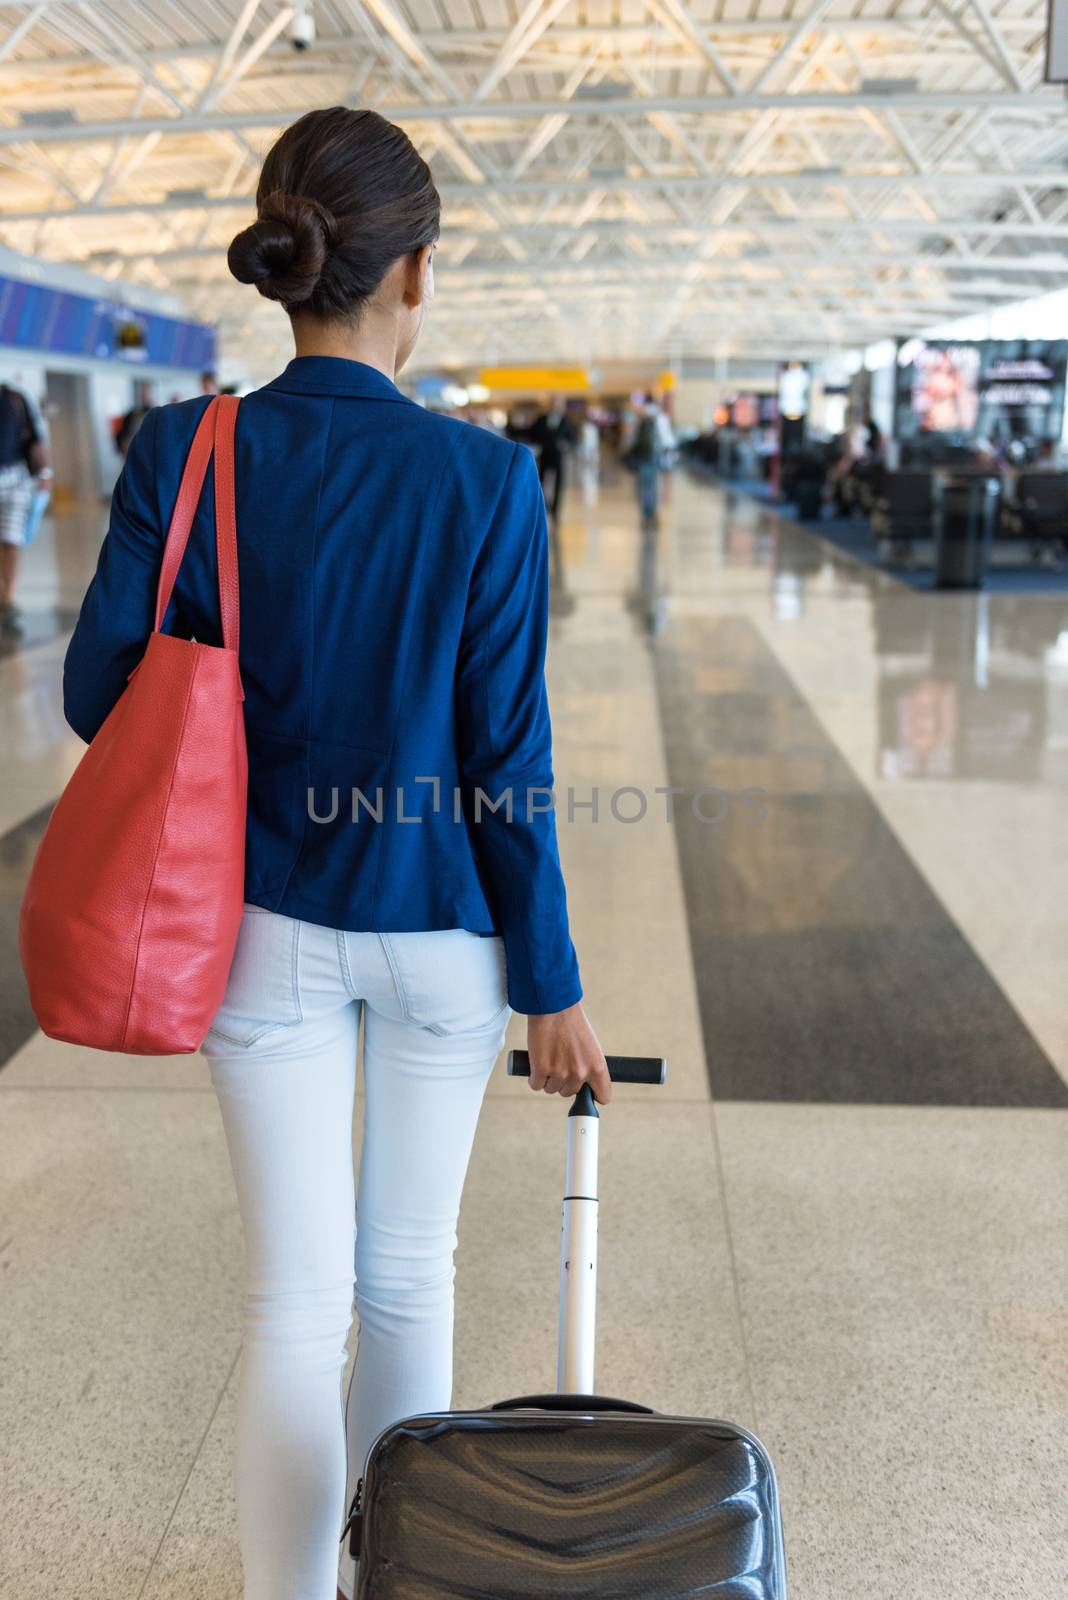 Woman traveler walking through airport terminal going to gate carrying purse and carry-on hand luggage for flight travel.